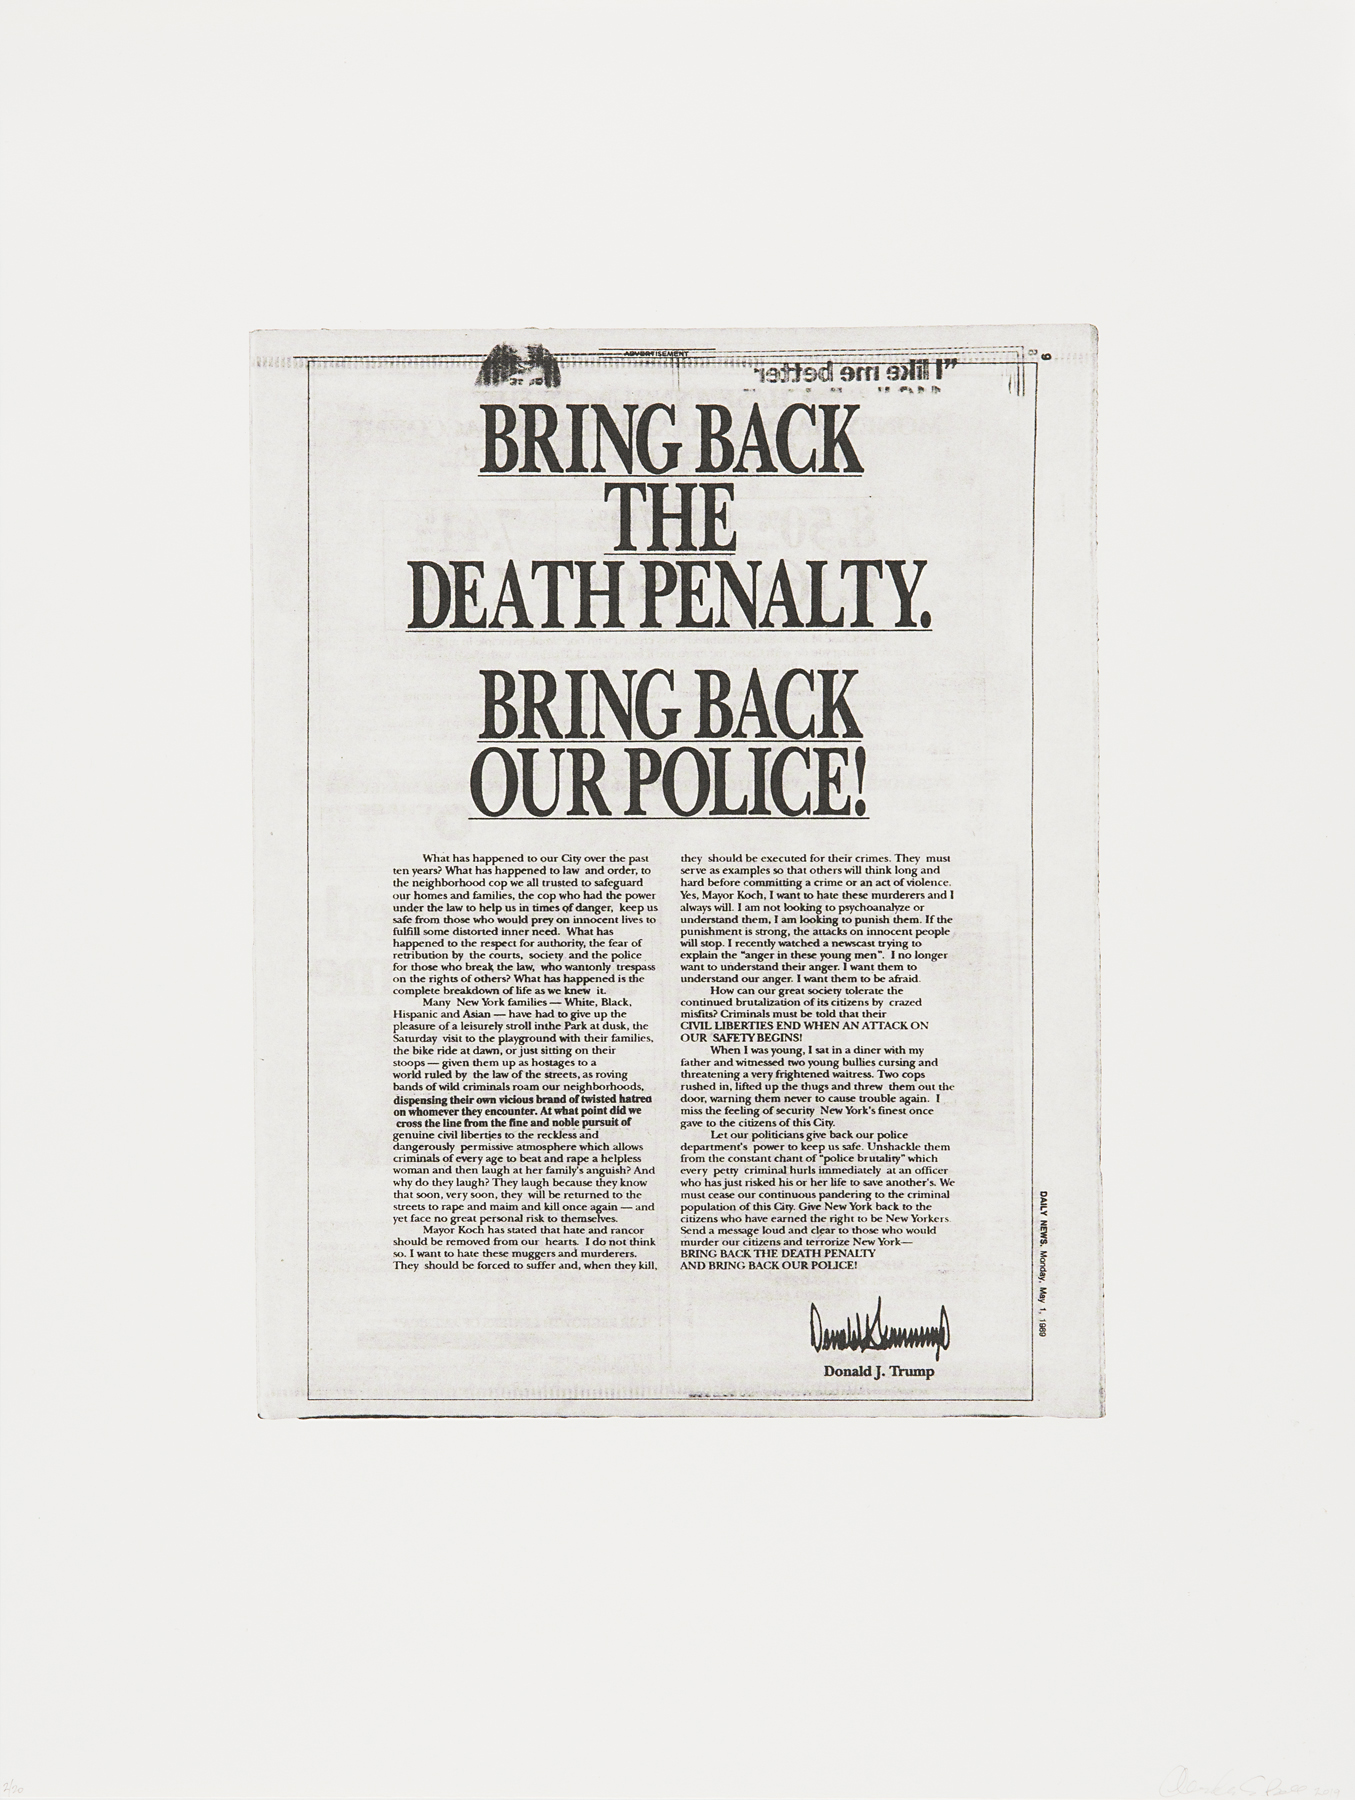 A printed page from a newspaper with a headline reading “BRING BACK THE DEATH PENALTY. BRING BACK OUR POLICE!” The following article is separated into two columns and is a letter signed by Donald J. Trump. 